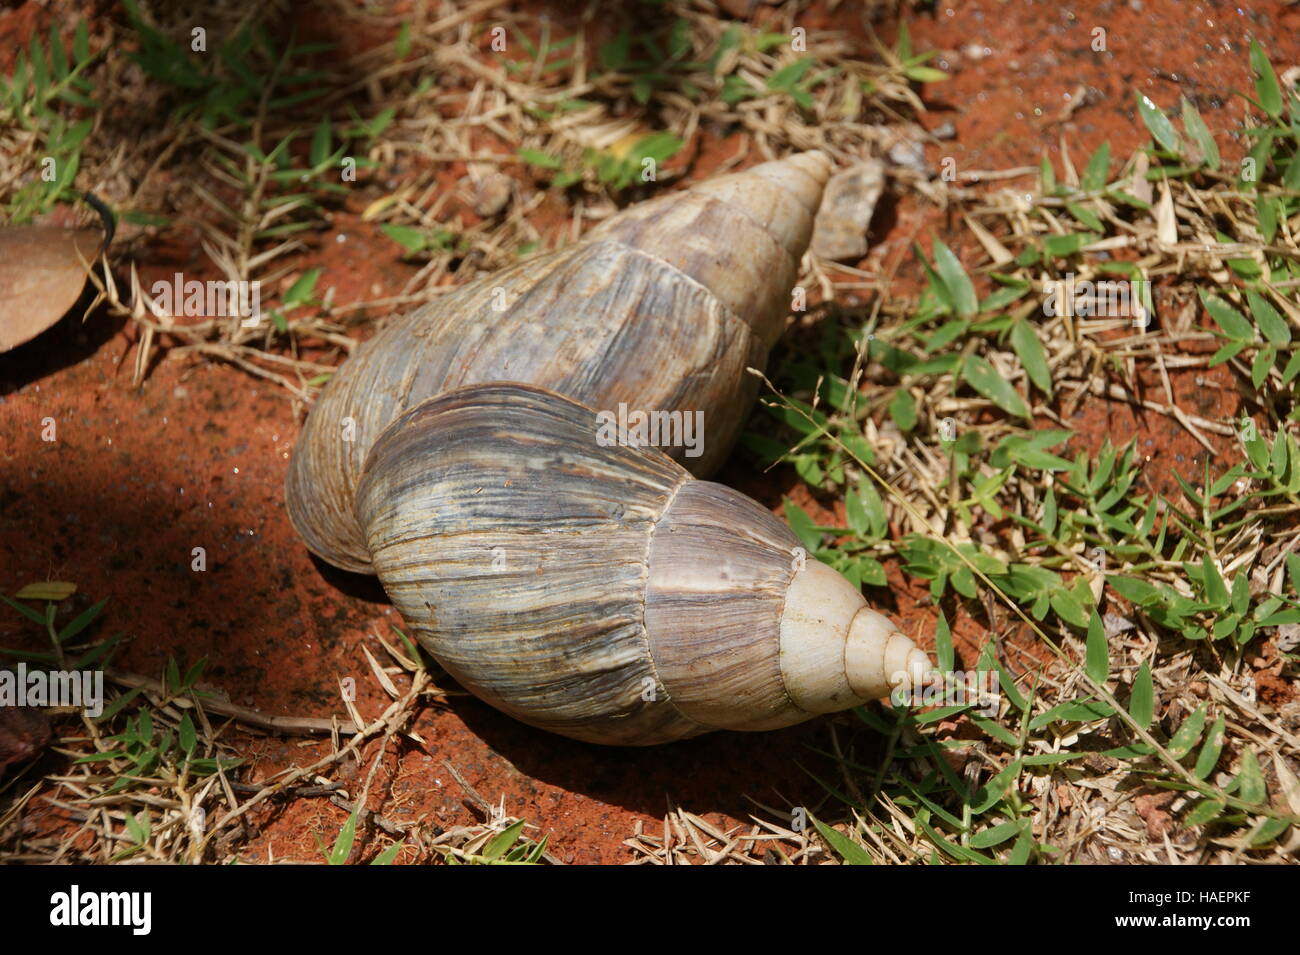 Achatina fulica in the woods of Mount Mourne. Morne Seychellois National Park. Mahe Island. Stock Photo